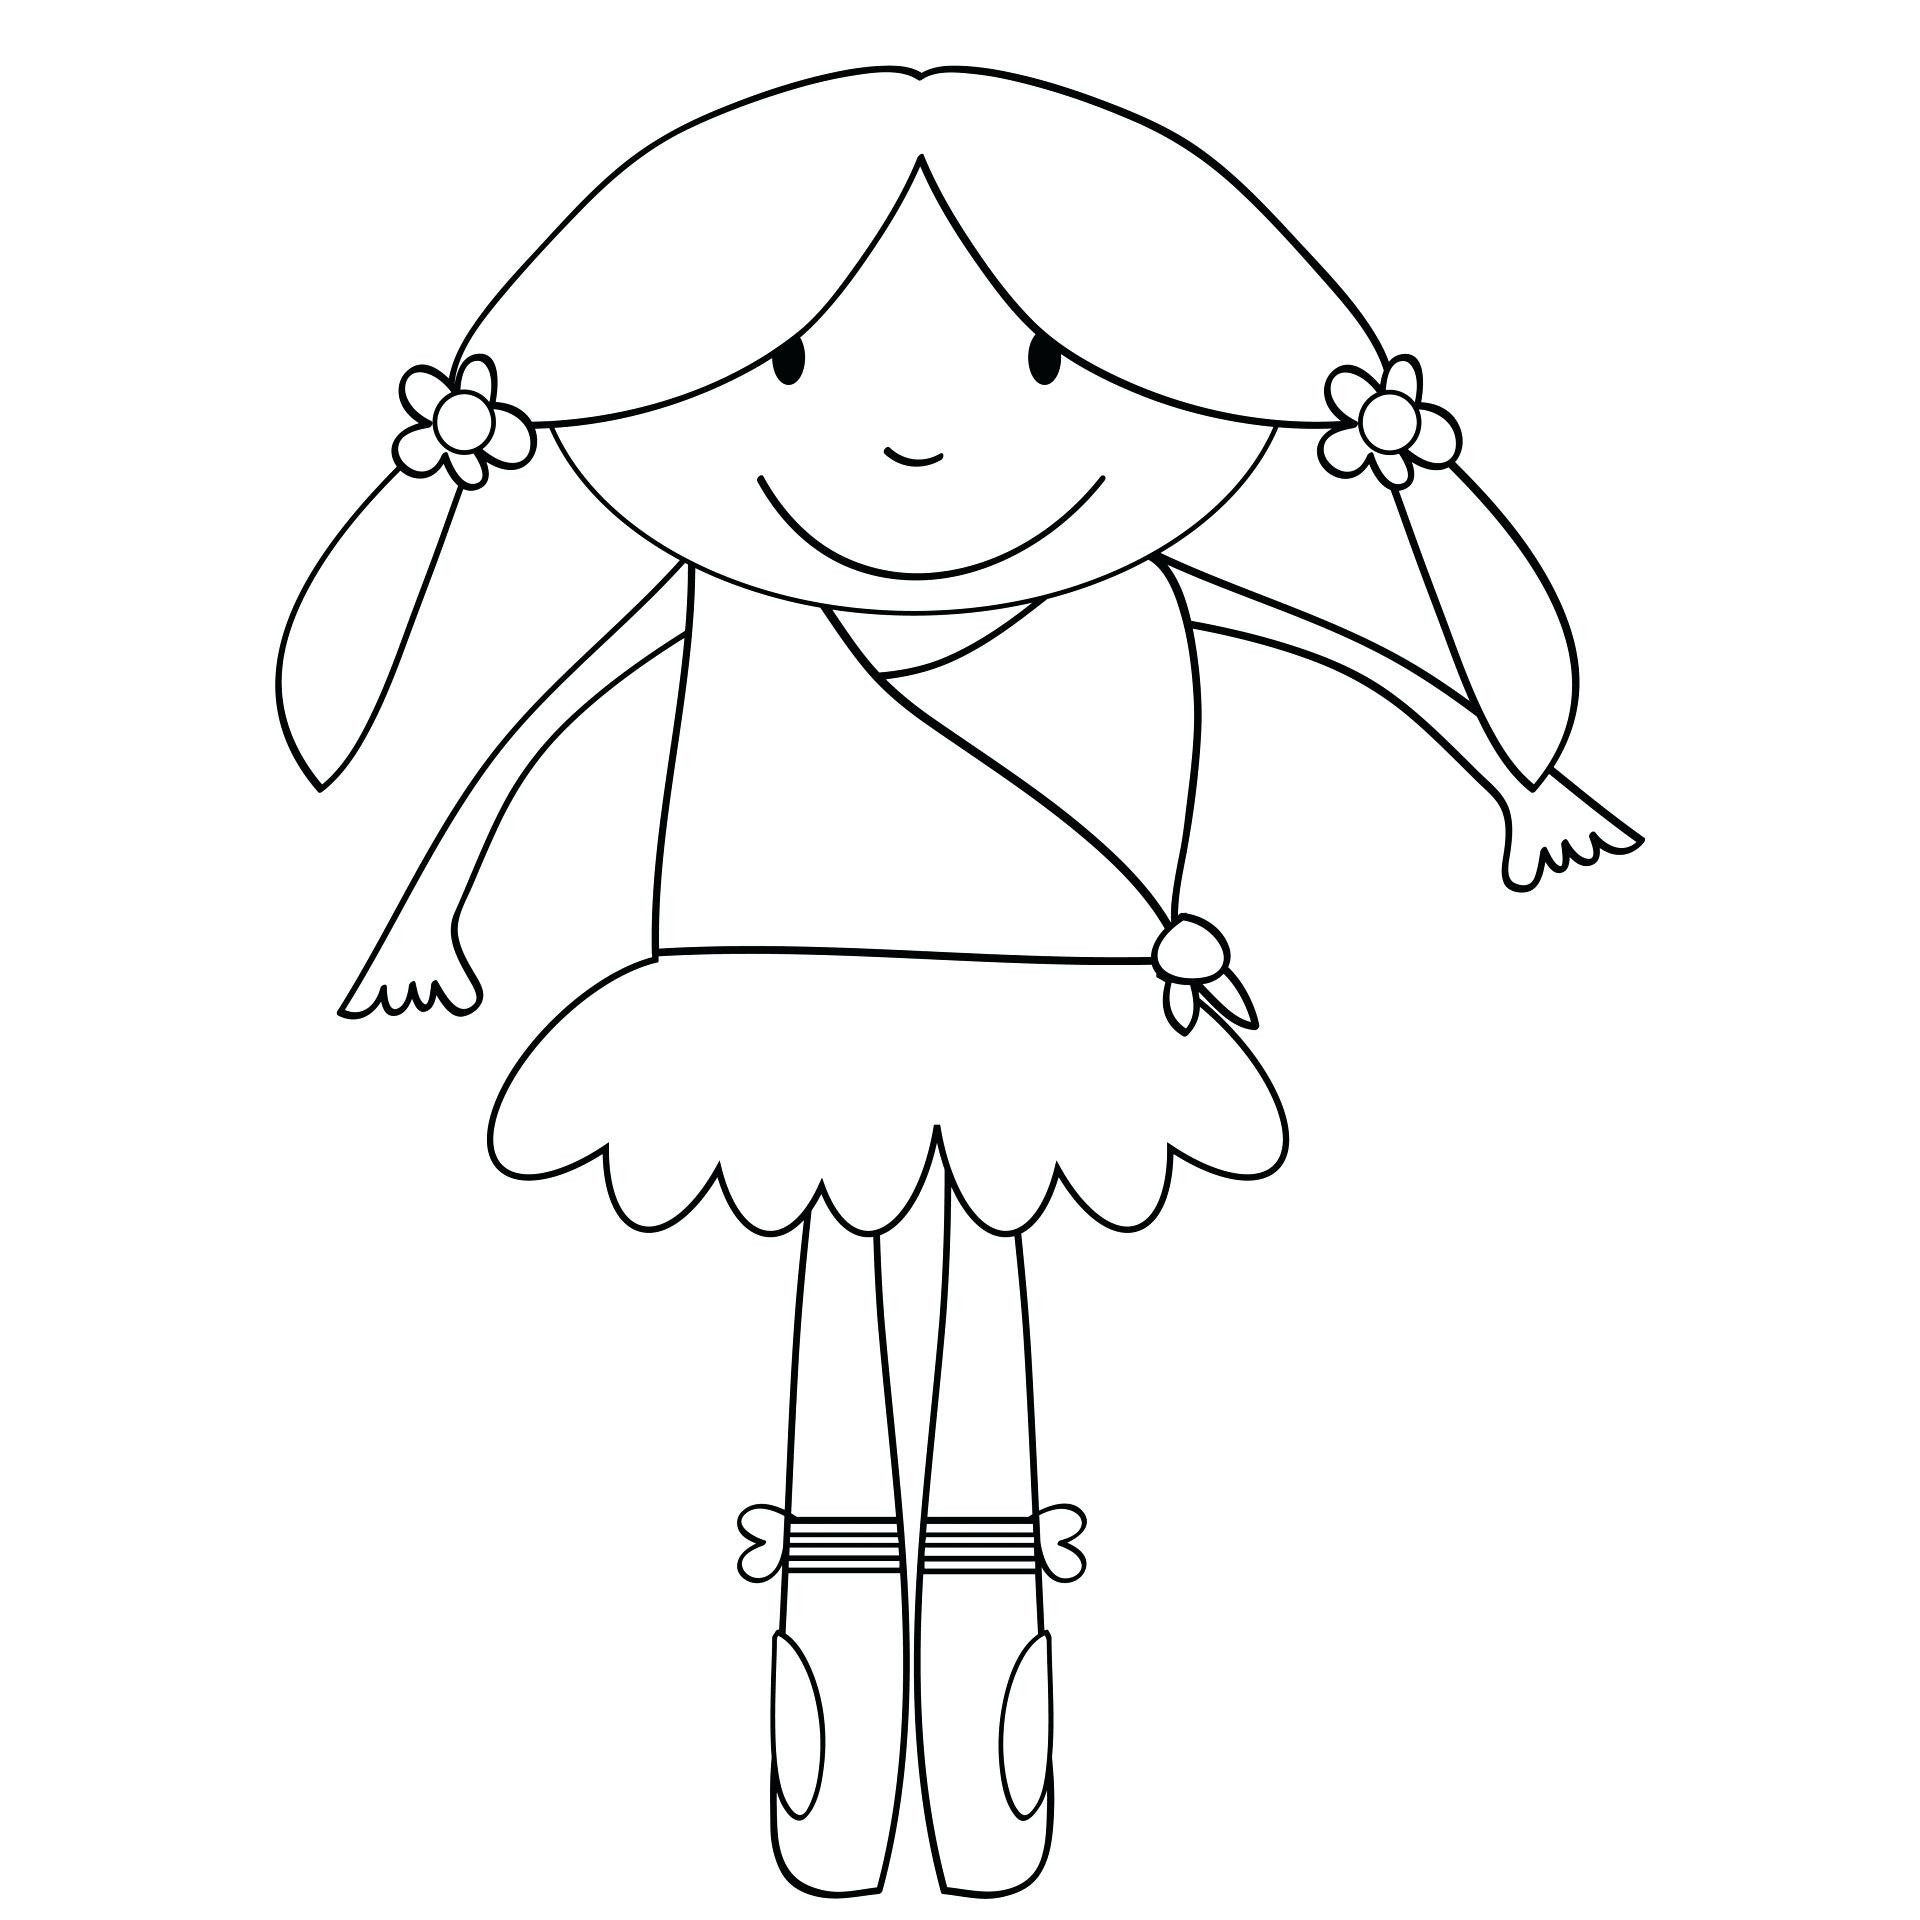 Ballerina Coloring Pages For Kids
 Kids Dancing Drawing at GetDrawings